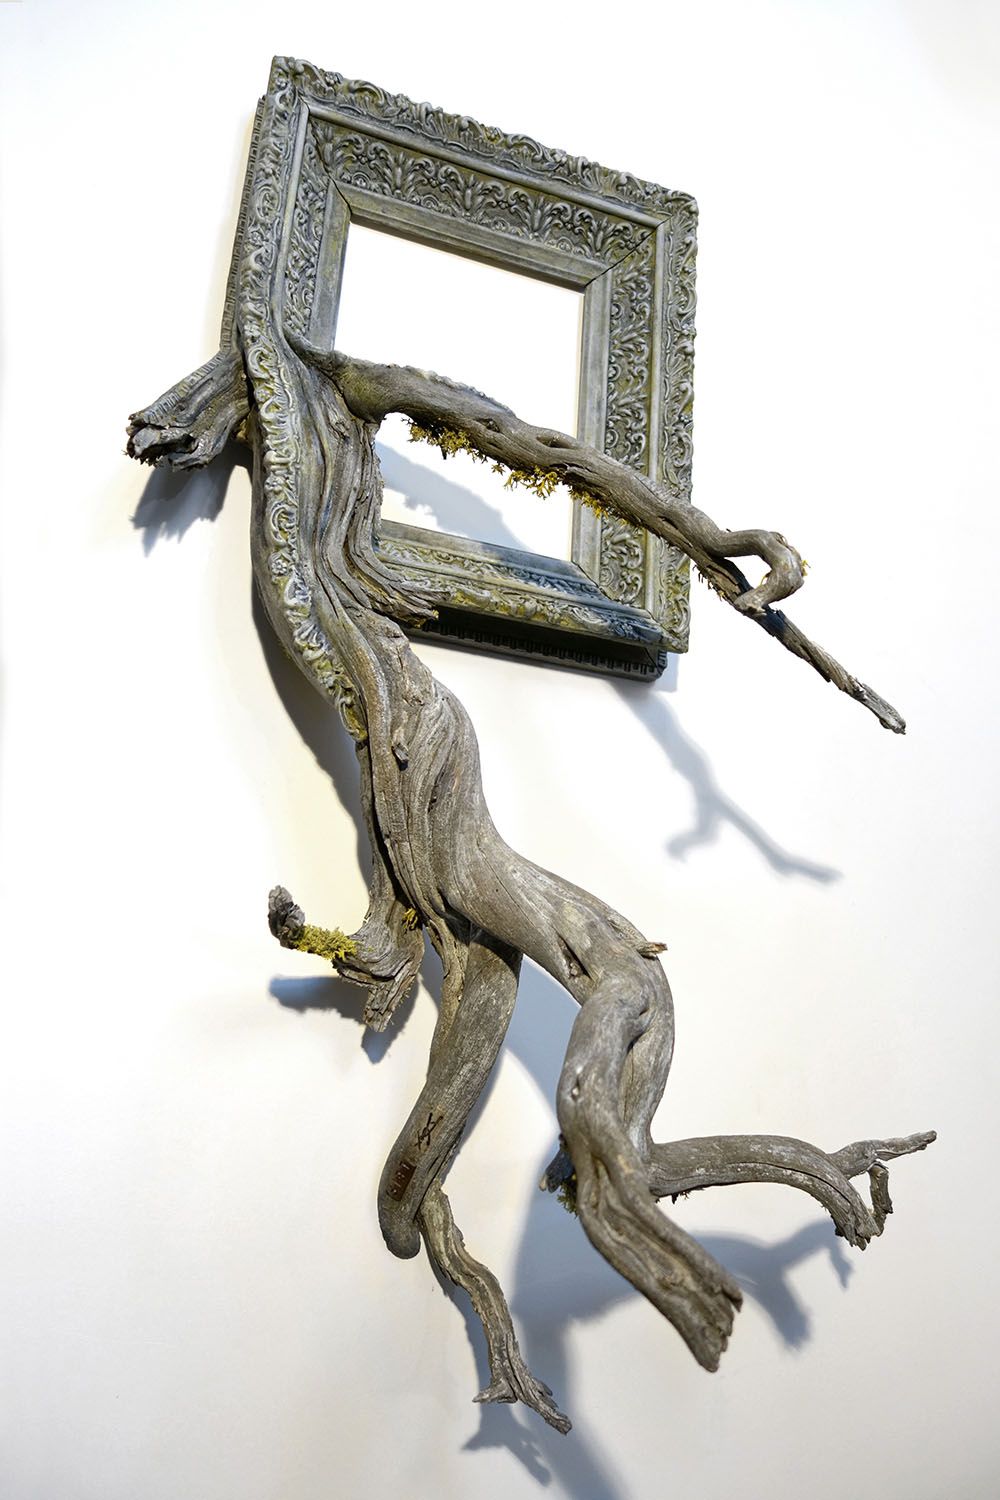 Tree Roots And Branches Fused With Ornate Picture Frames By Darryl Cox 14